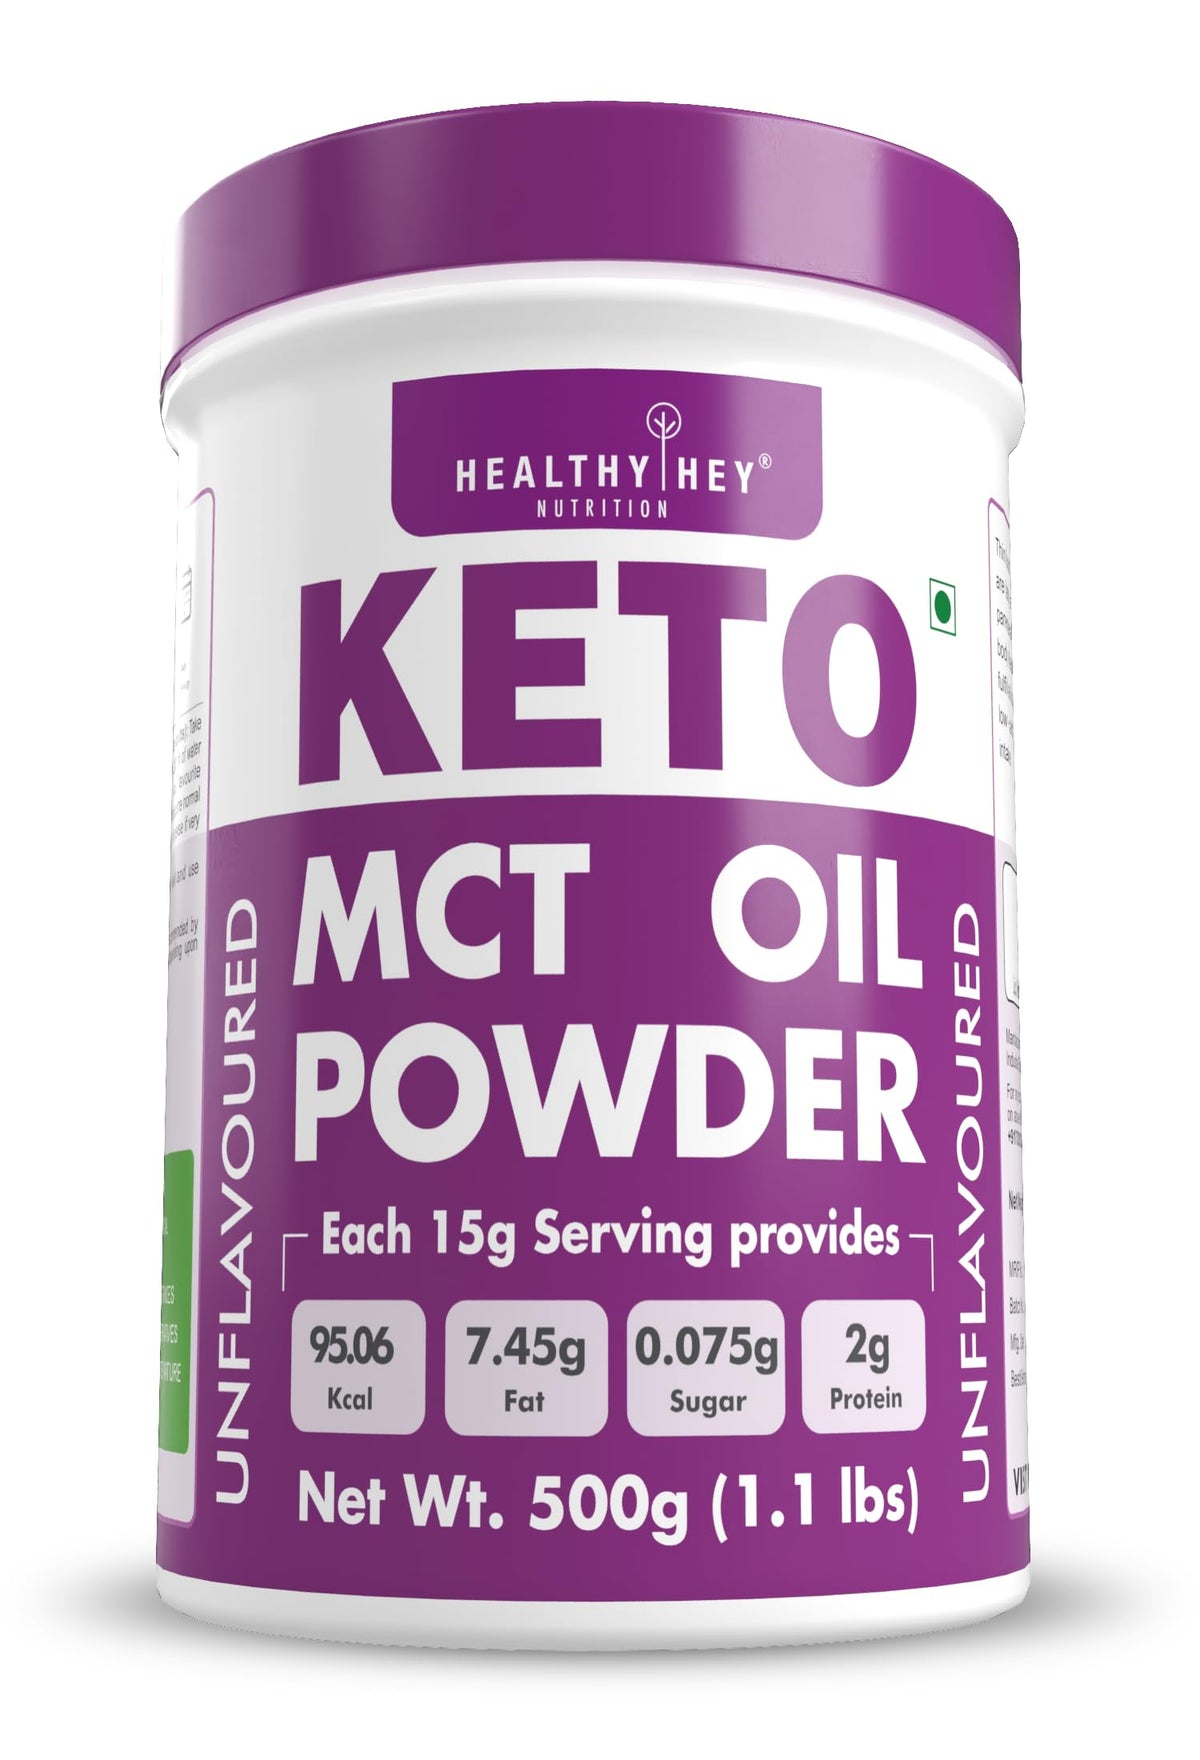 HealthyHey Nutrition Keto MCT Oil Powder, Coconut Medium Chain Triglycerides for Pure Clean Energy, Ketogenic Non-Dairy Coffee Creamer, Bulk Supplement, Helps Boost Ketones, Unflavored 500g